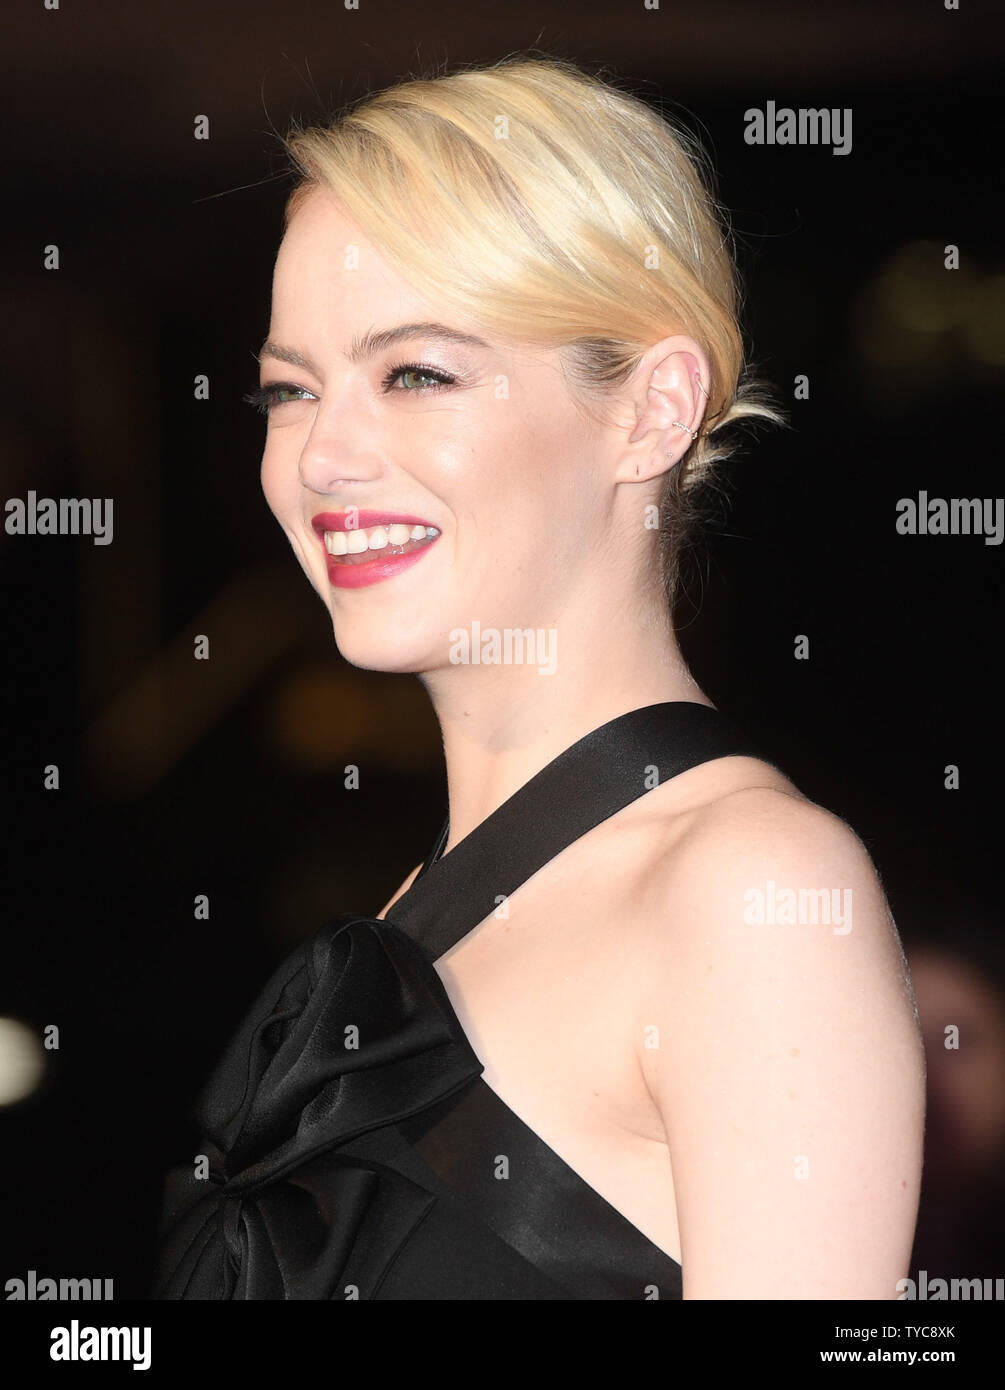 American actress Emma Stone attends the premiere of Killing Of a Sacred Deer during the BFI London Film Festtival in London on October 12, 2017. Photo by Rune Hellestad/ UPI Stock Photo